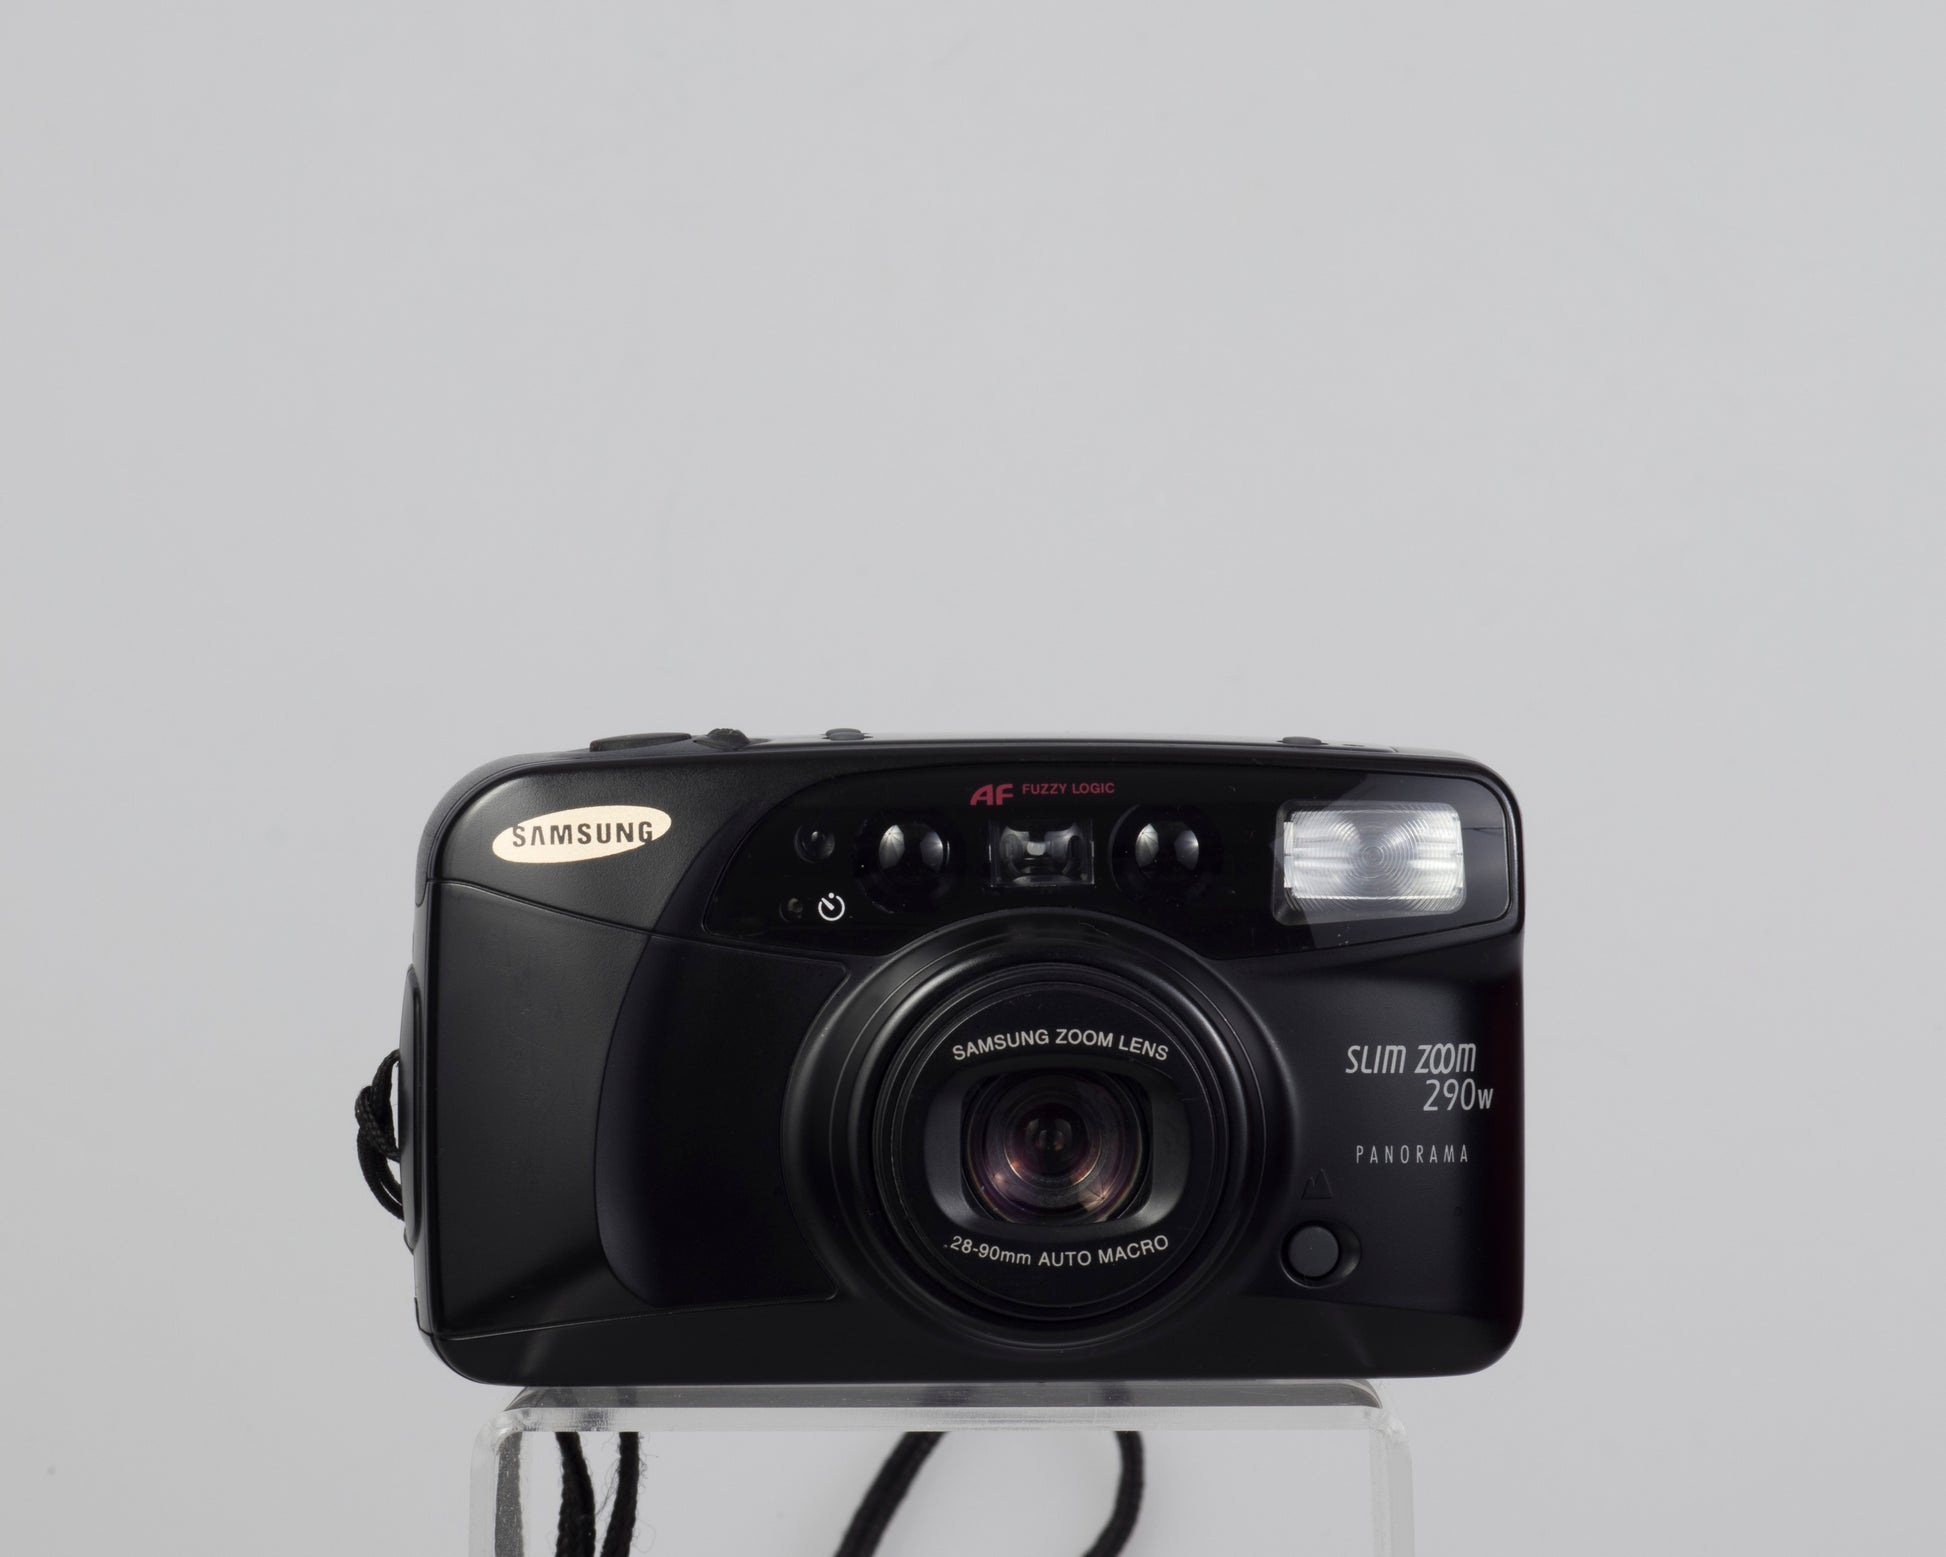 The Samsung Slim Zoom 290W (identical specs to the Samsung-made Rollei Prego 90) a high quality compact zoom point-and-shoot from the mid-90s with a wide 28-90mm zoom range